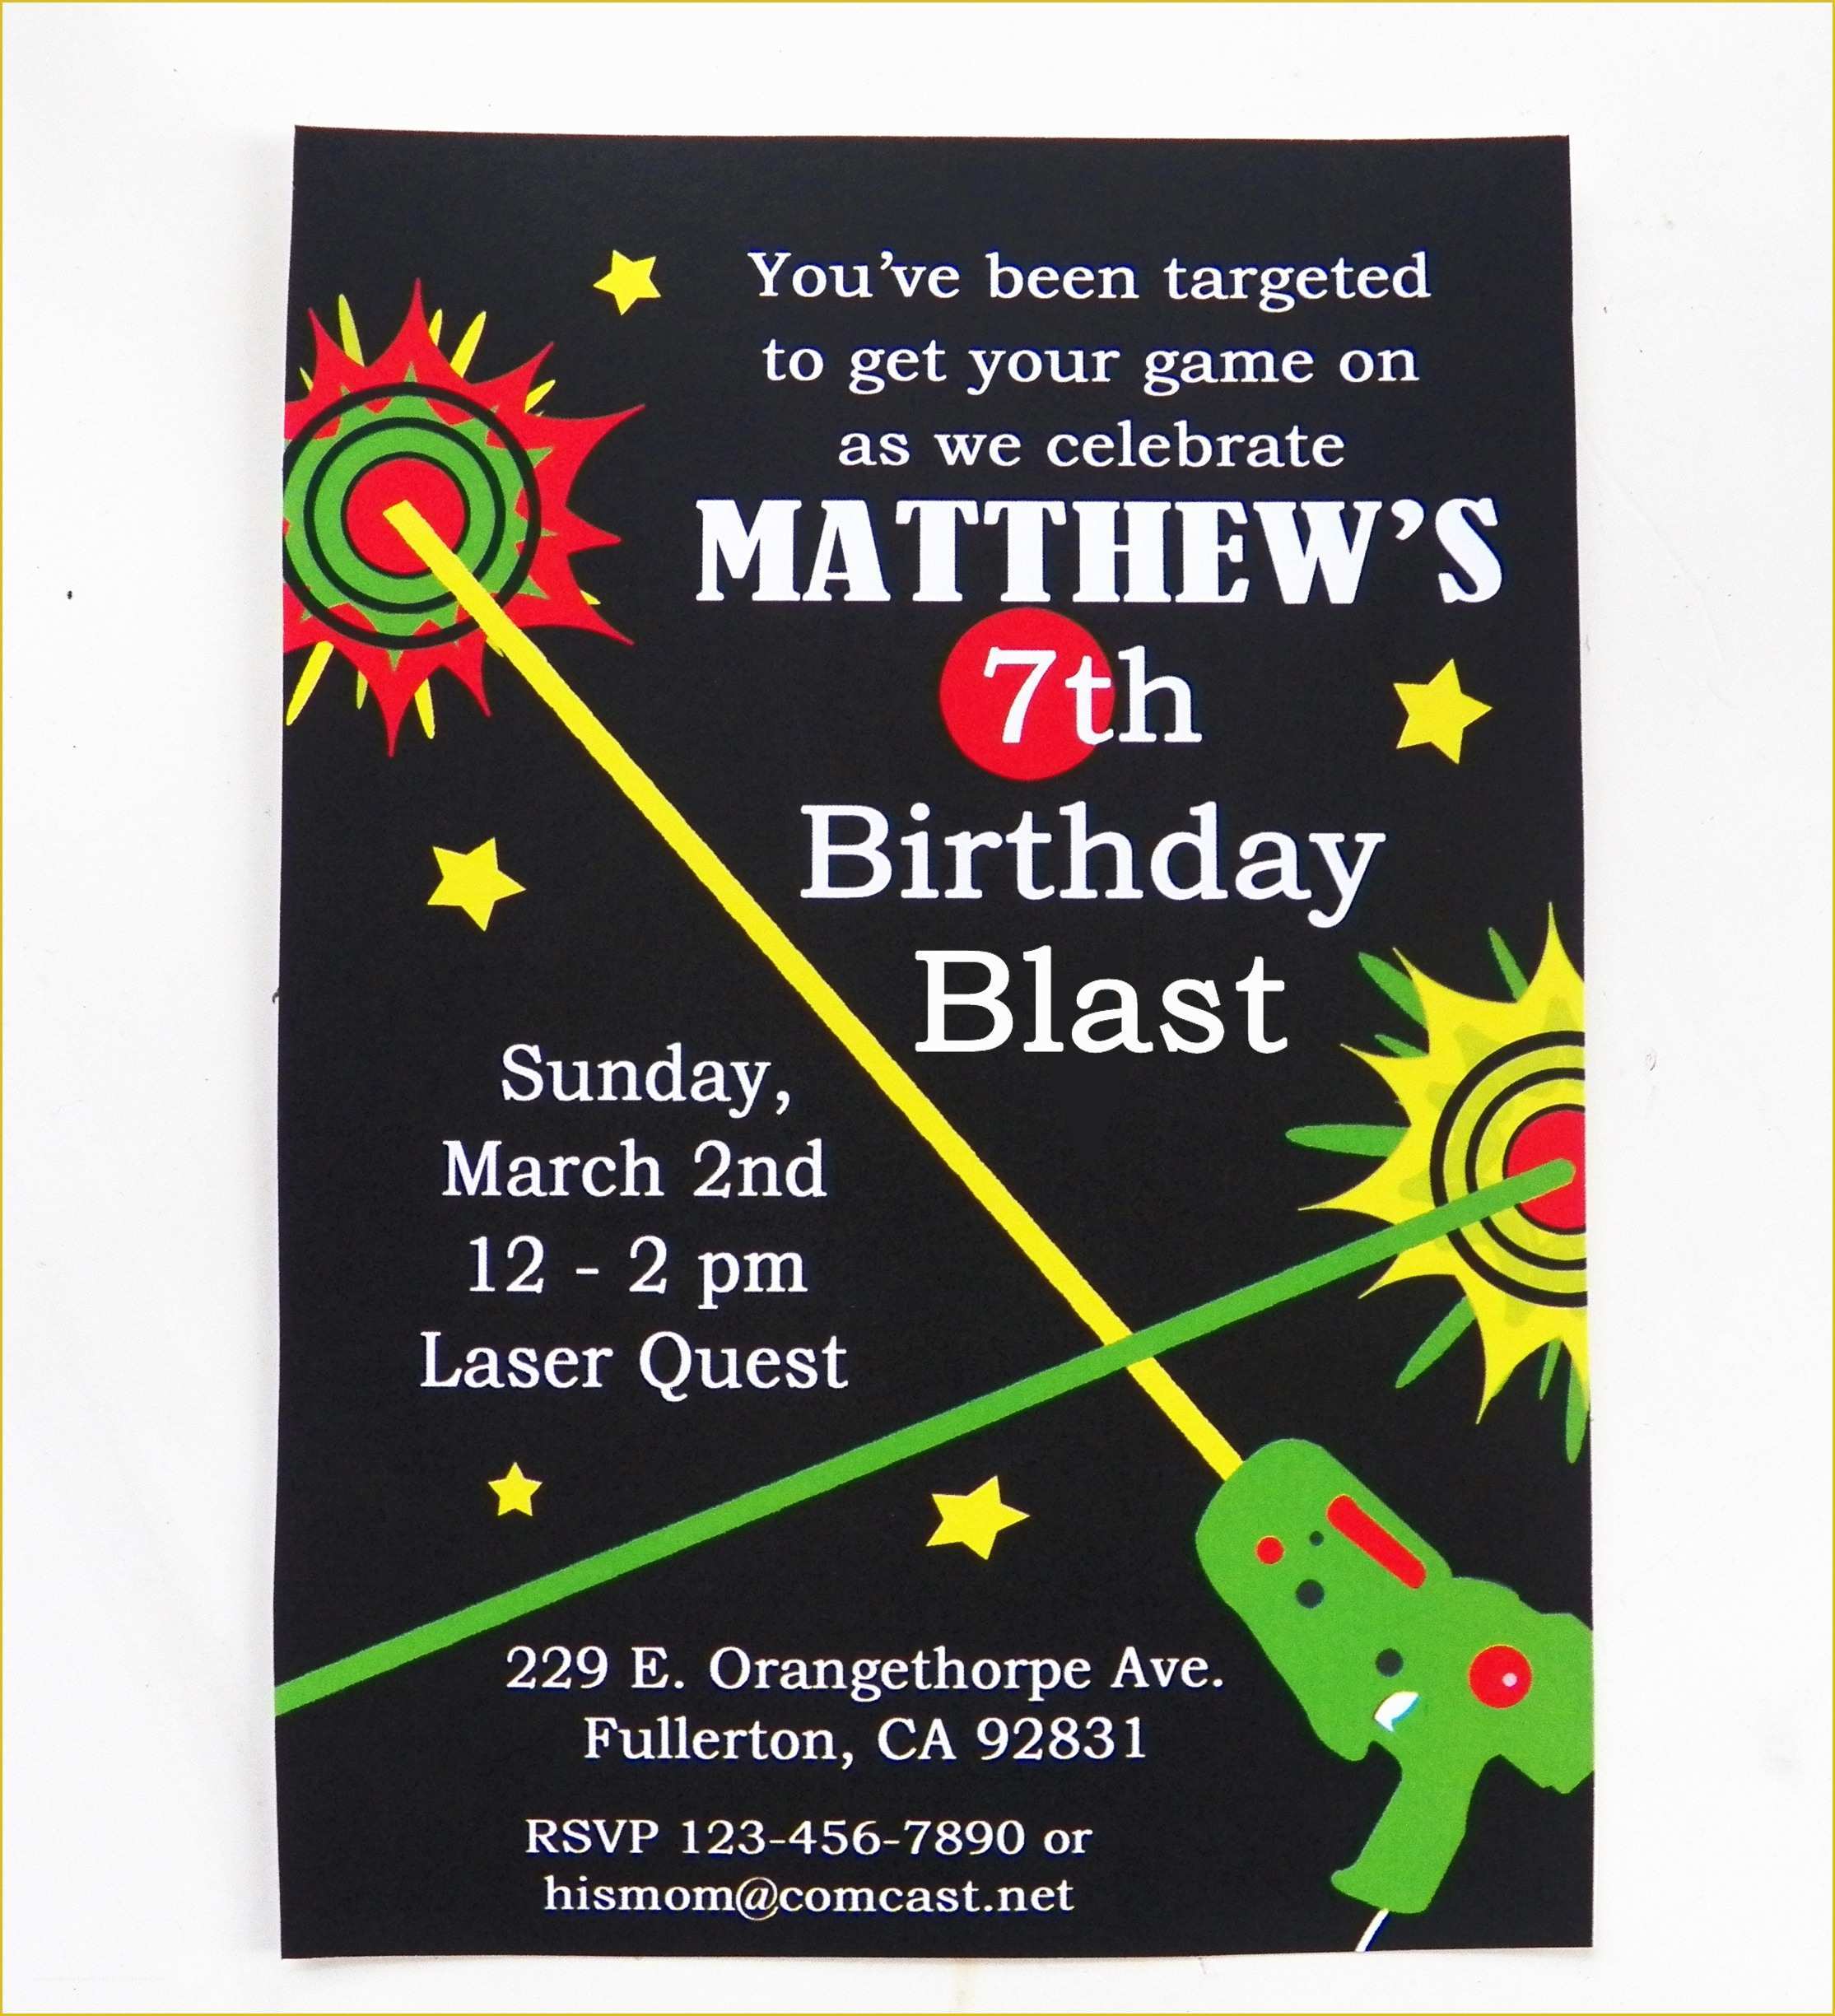 Free Printable Laser Tag Invitation Template Of Laser Tag Birthday Blast Party that Party Chick